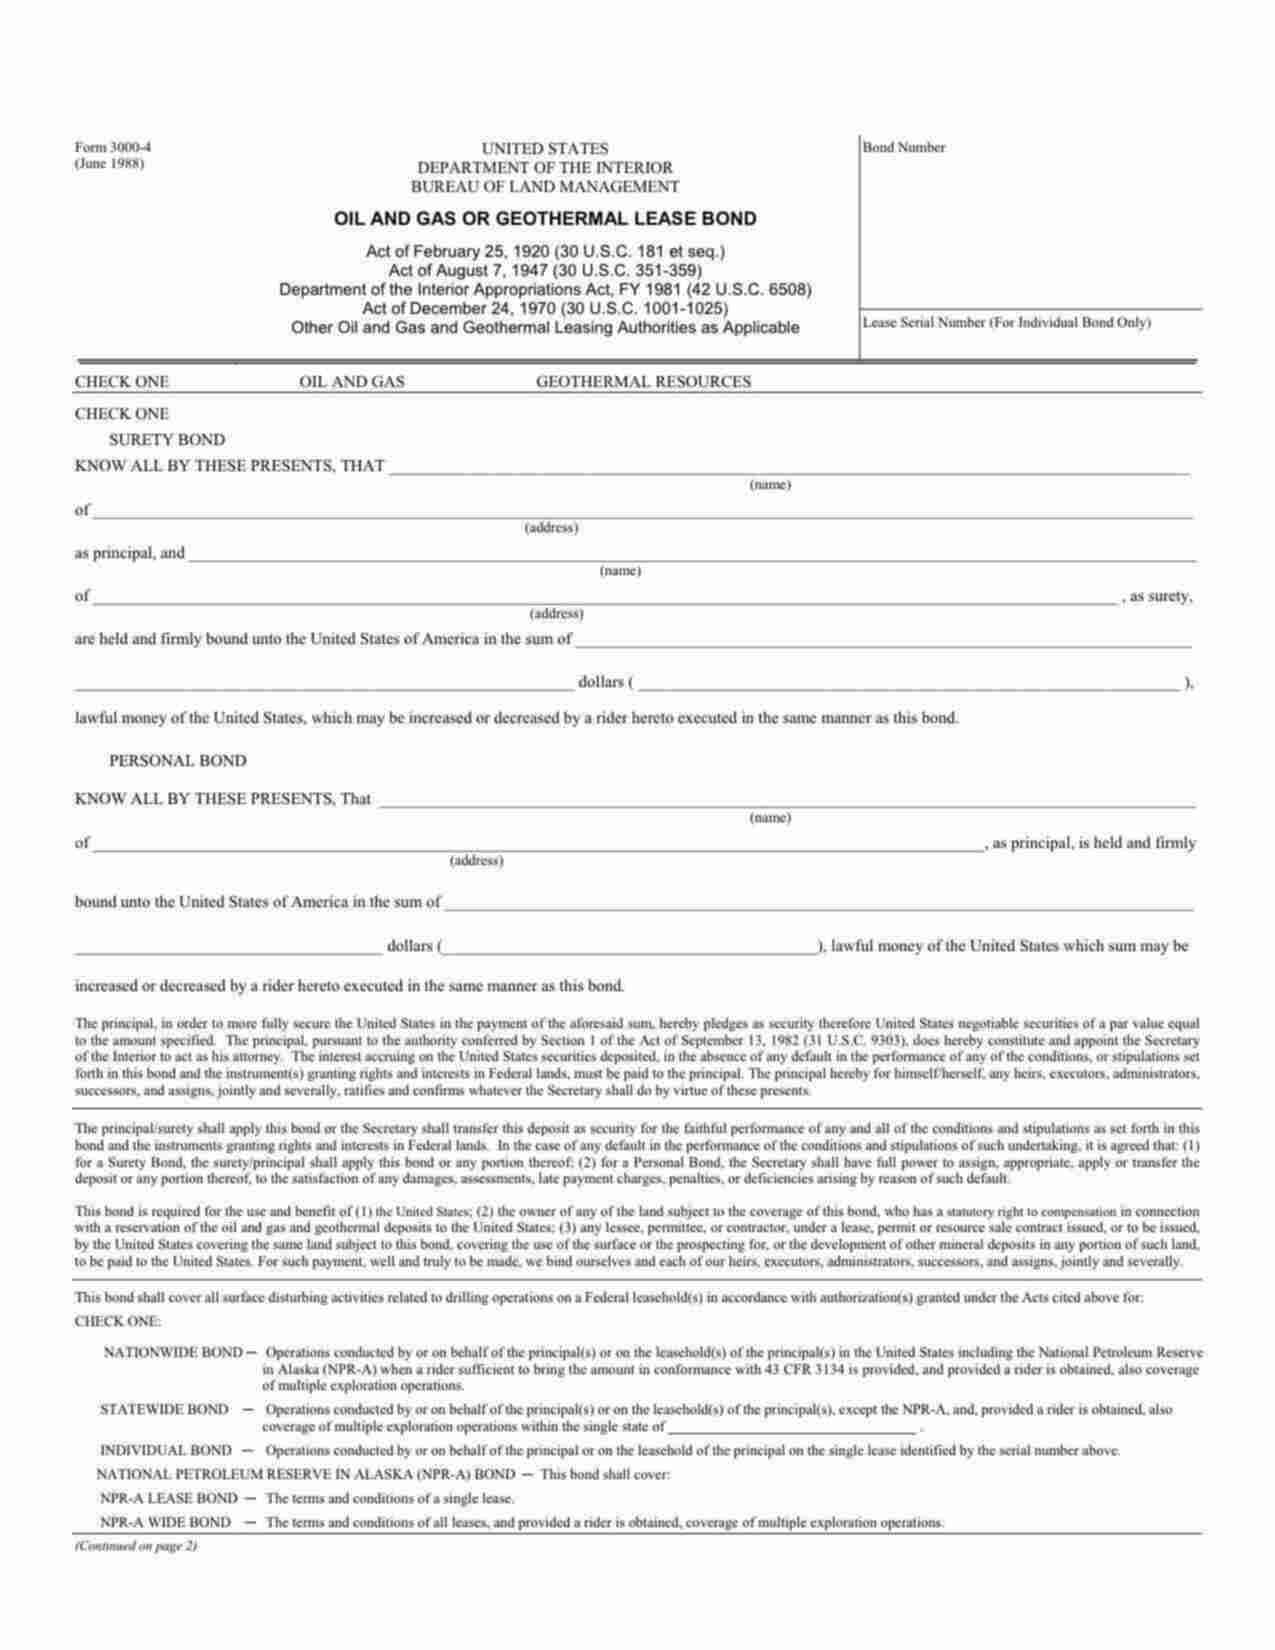 Federal Geothermal Resources Lease Bond Form